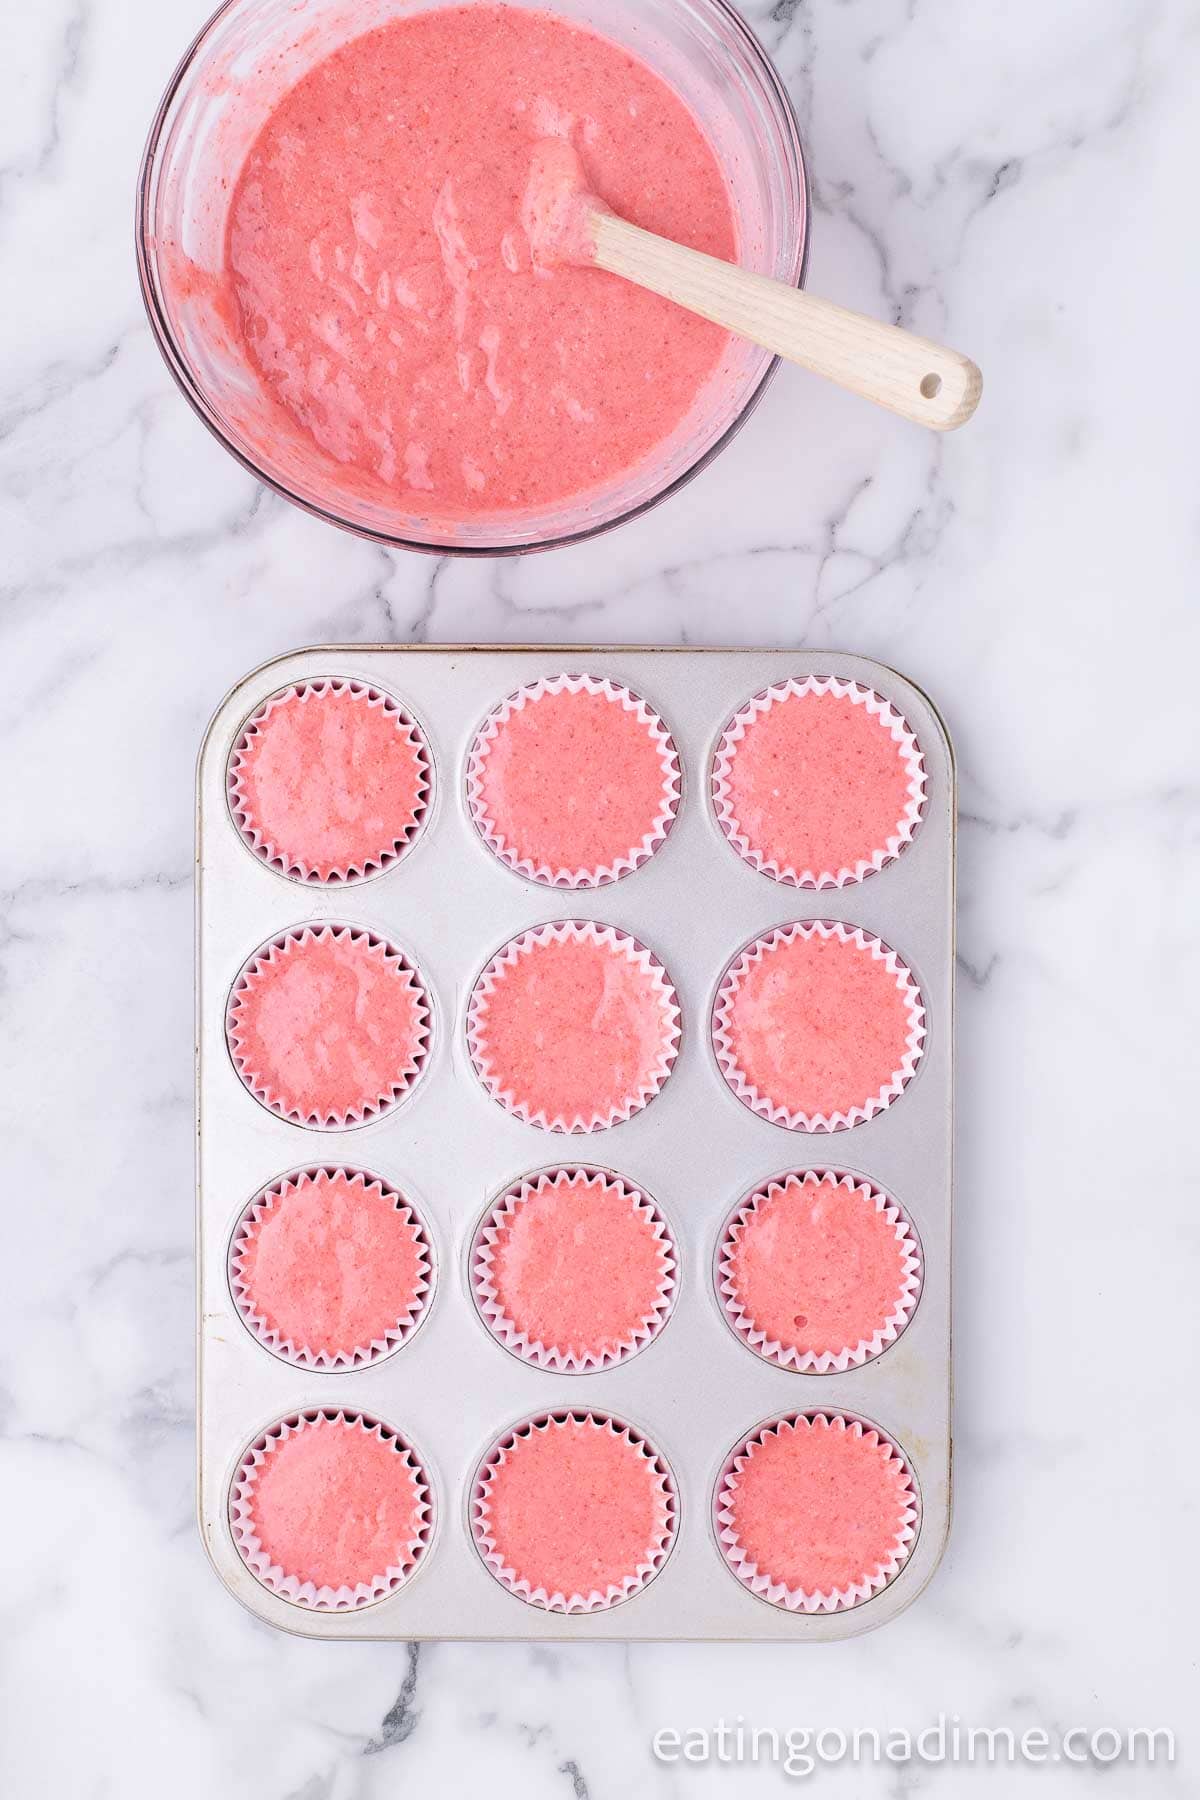 Divide the strawberry cake mix batter into the muffin tin